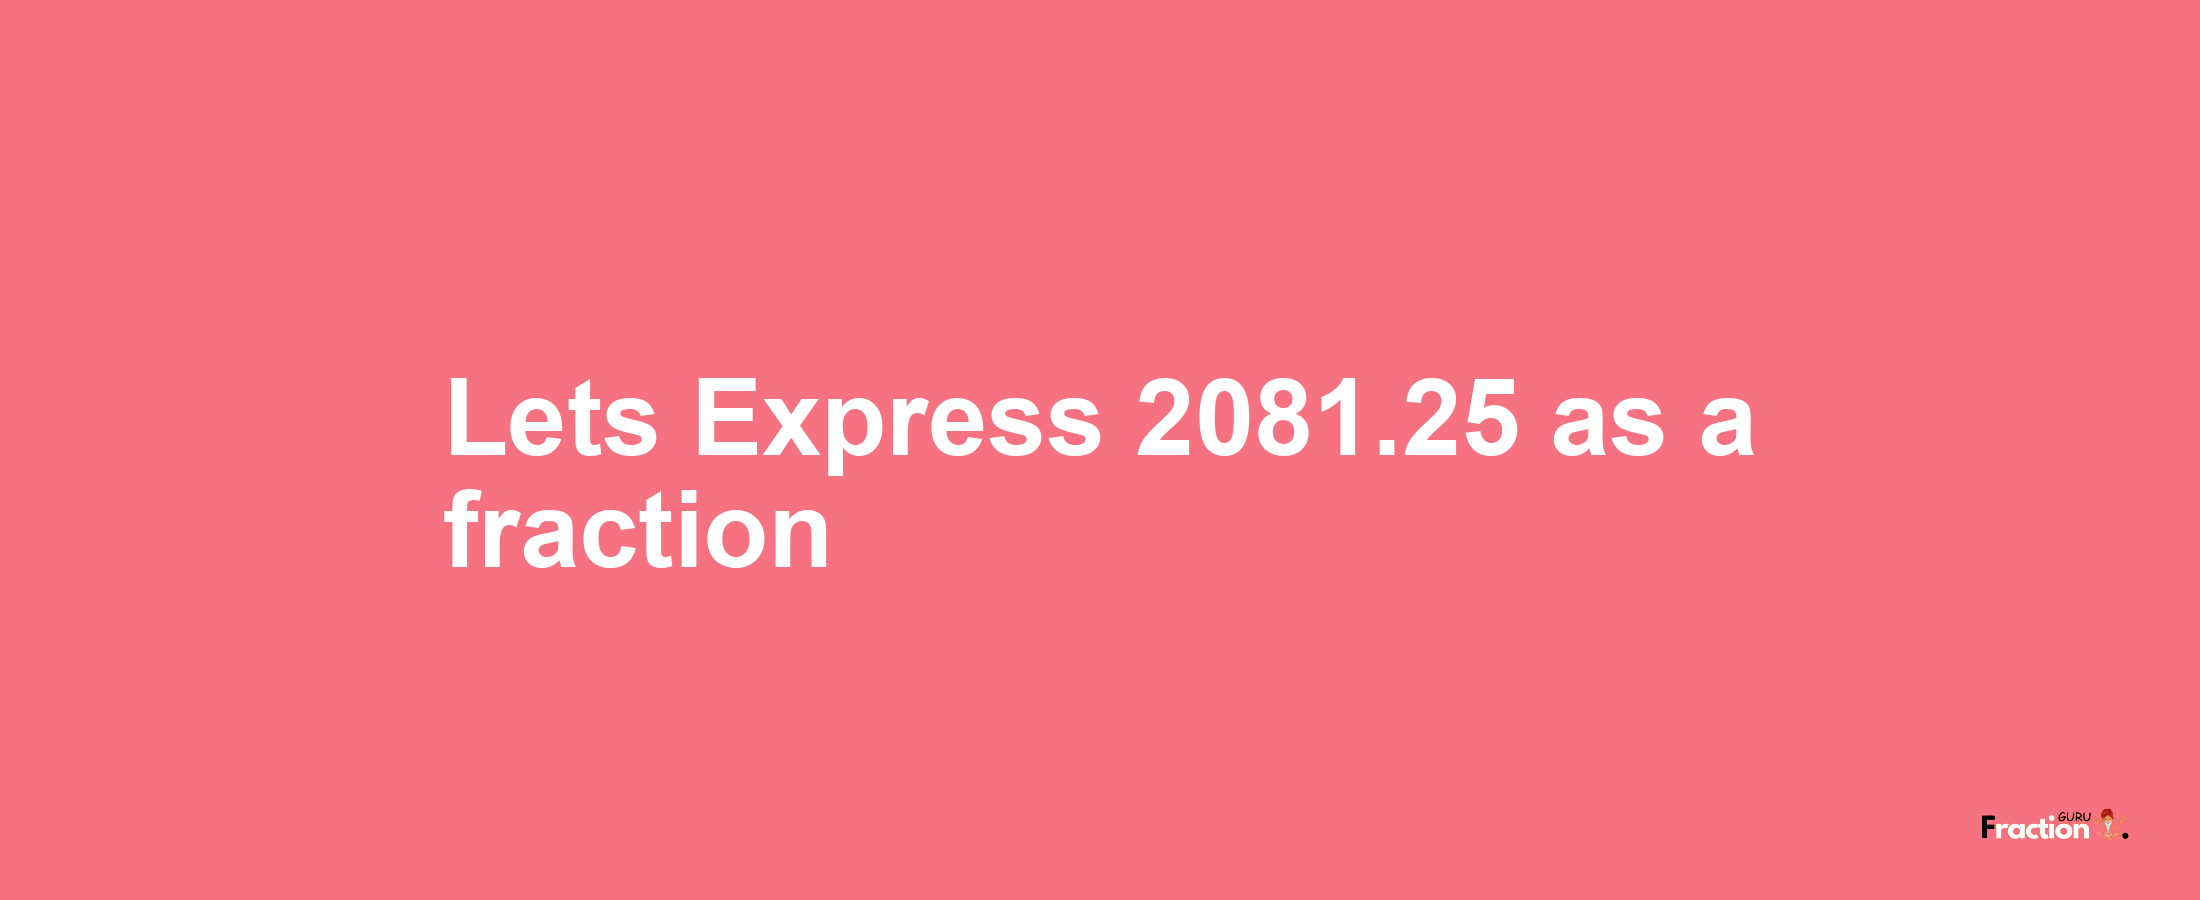 Lets Express 2081.25 as afraction